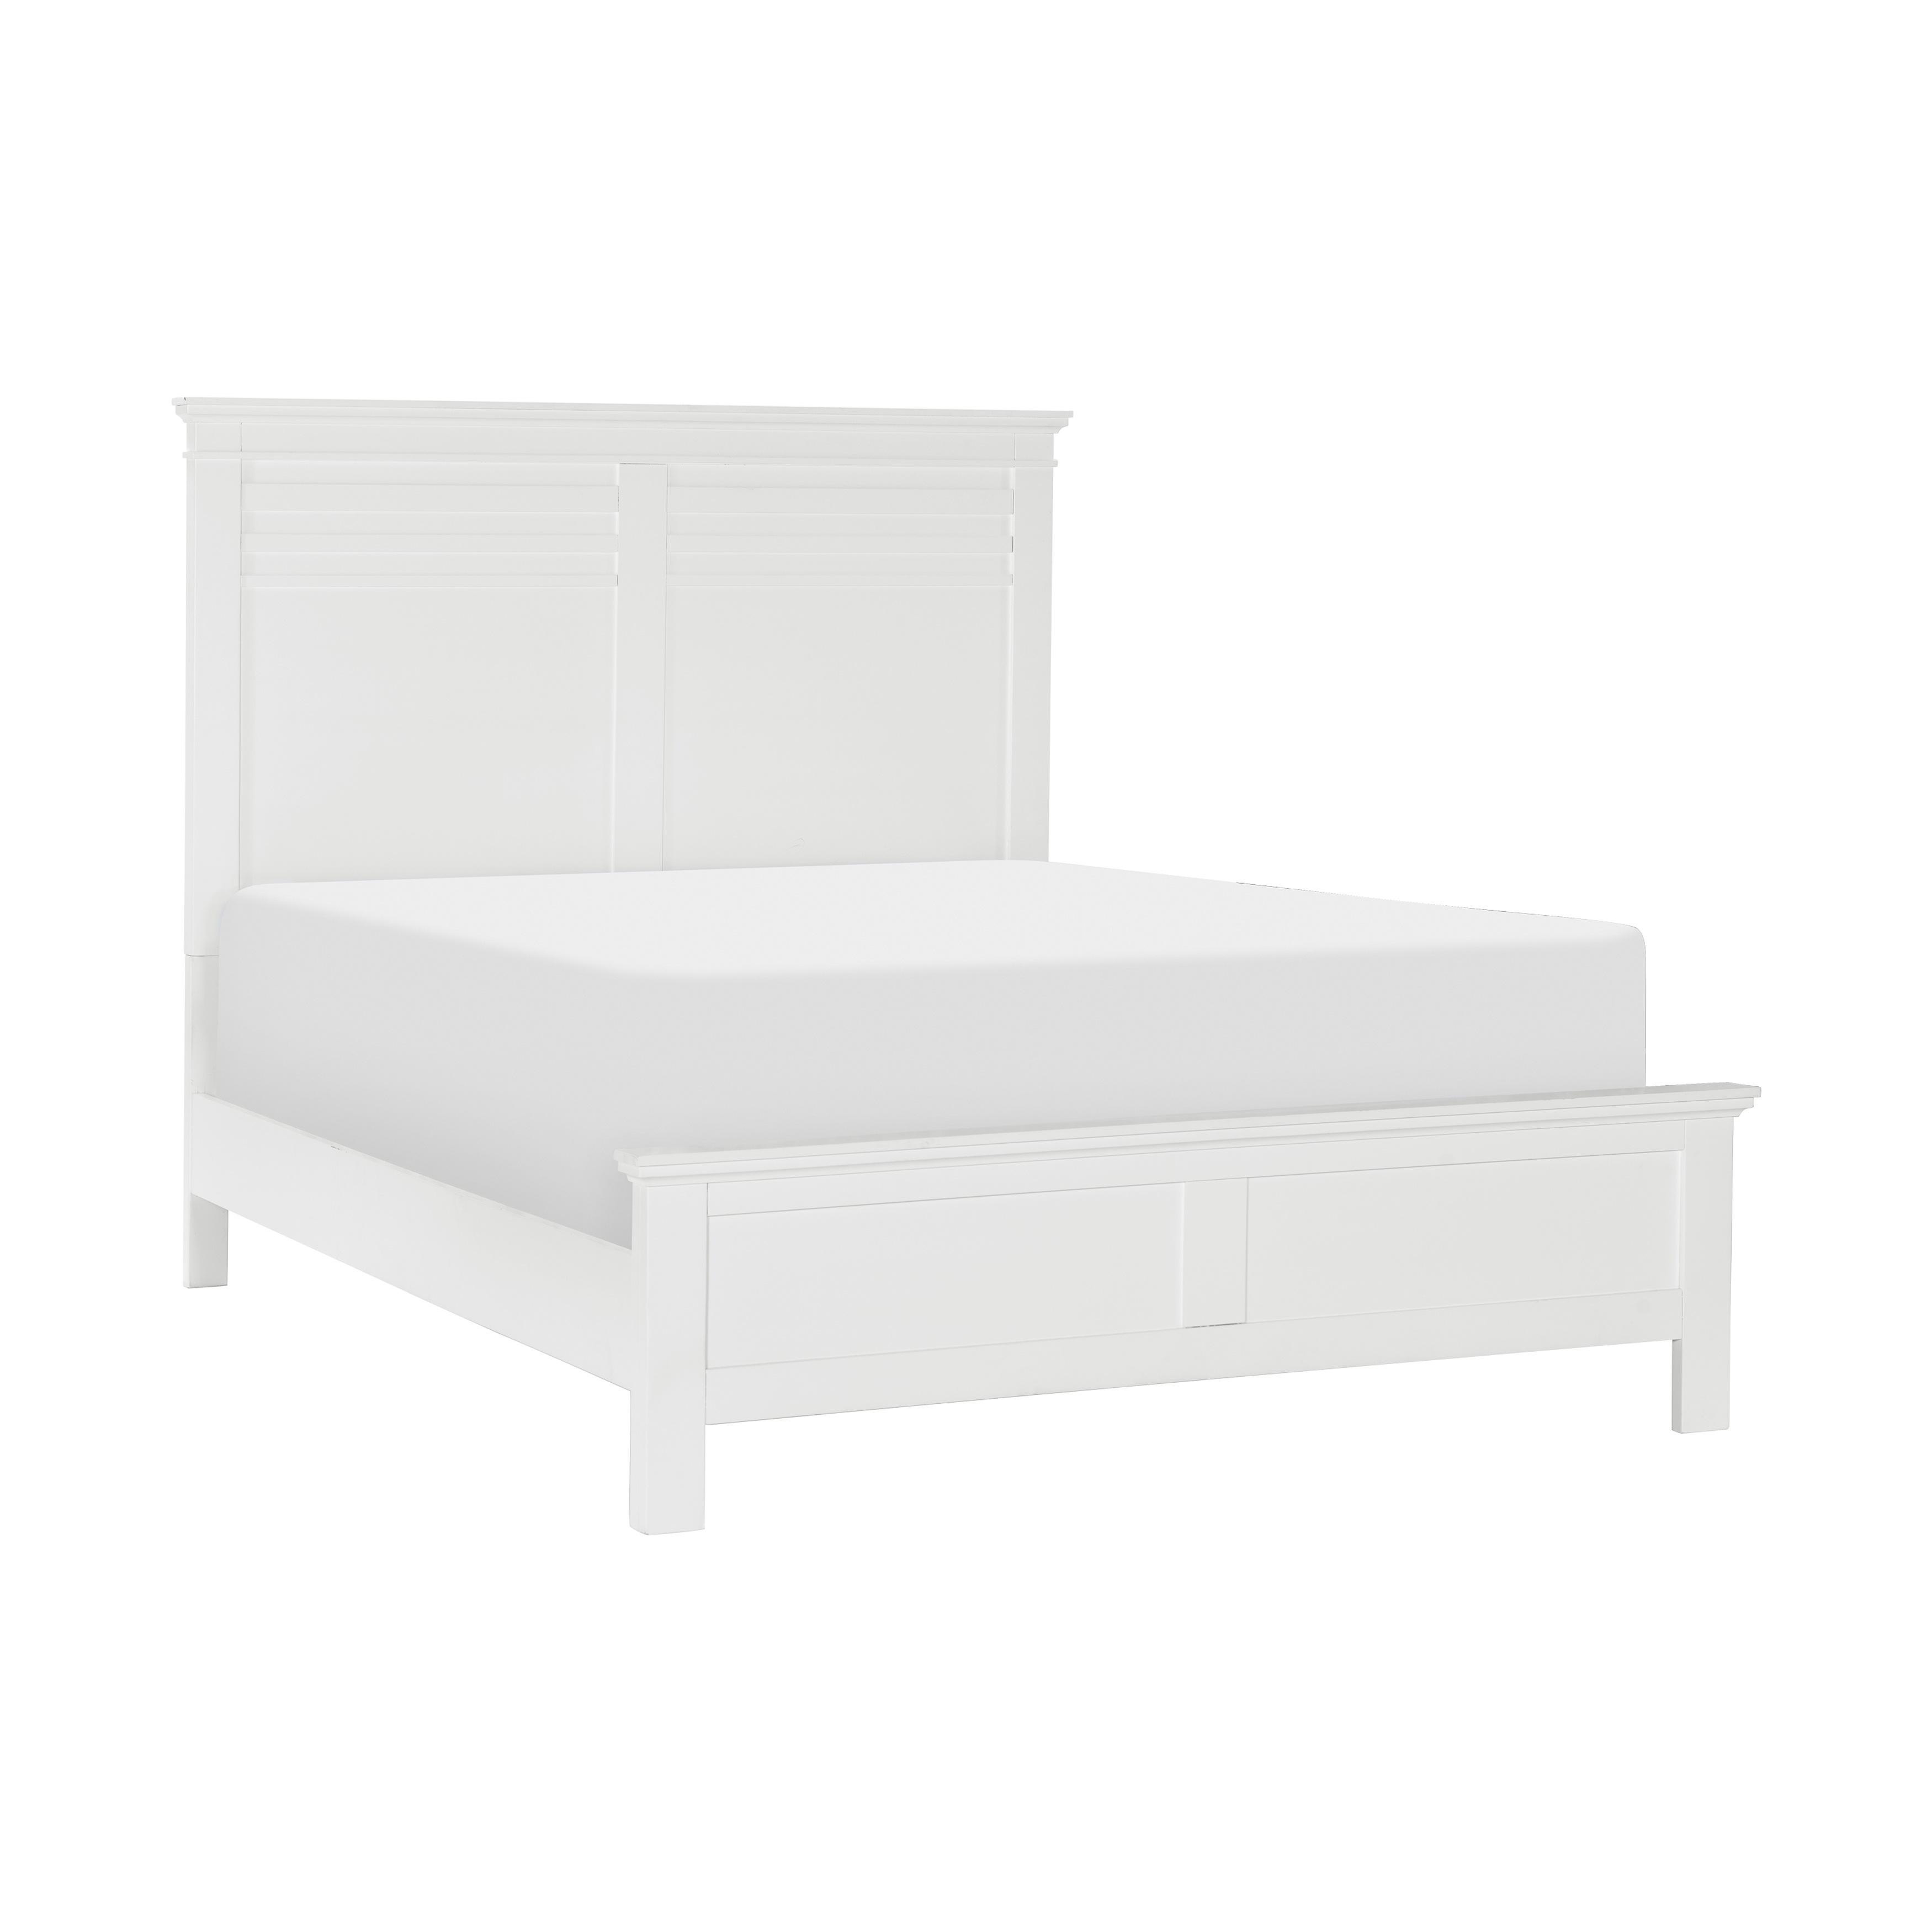 

    
Transitional White Wood Queen Bedroom Set 3pcs Homelegance 1675W-1* Blaire Farm
